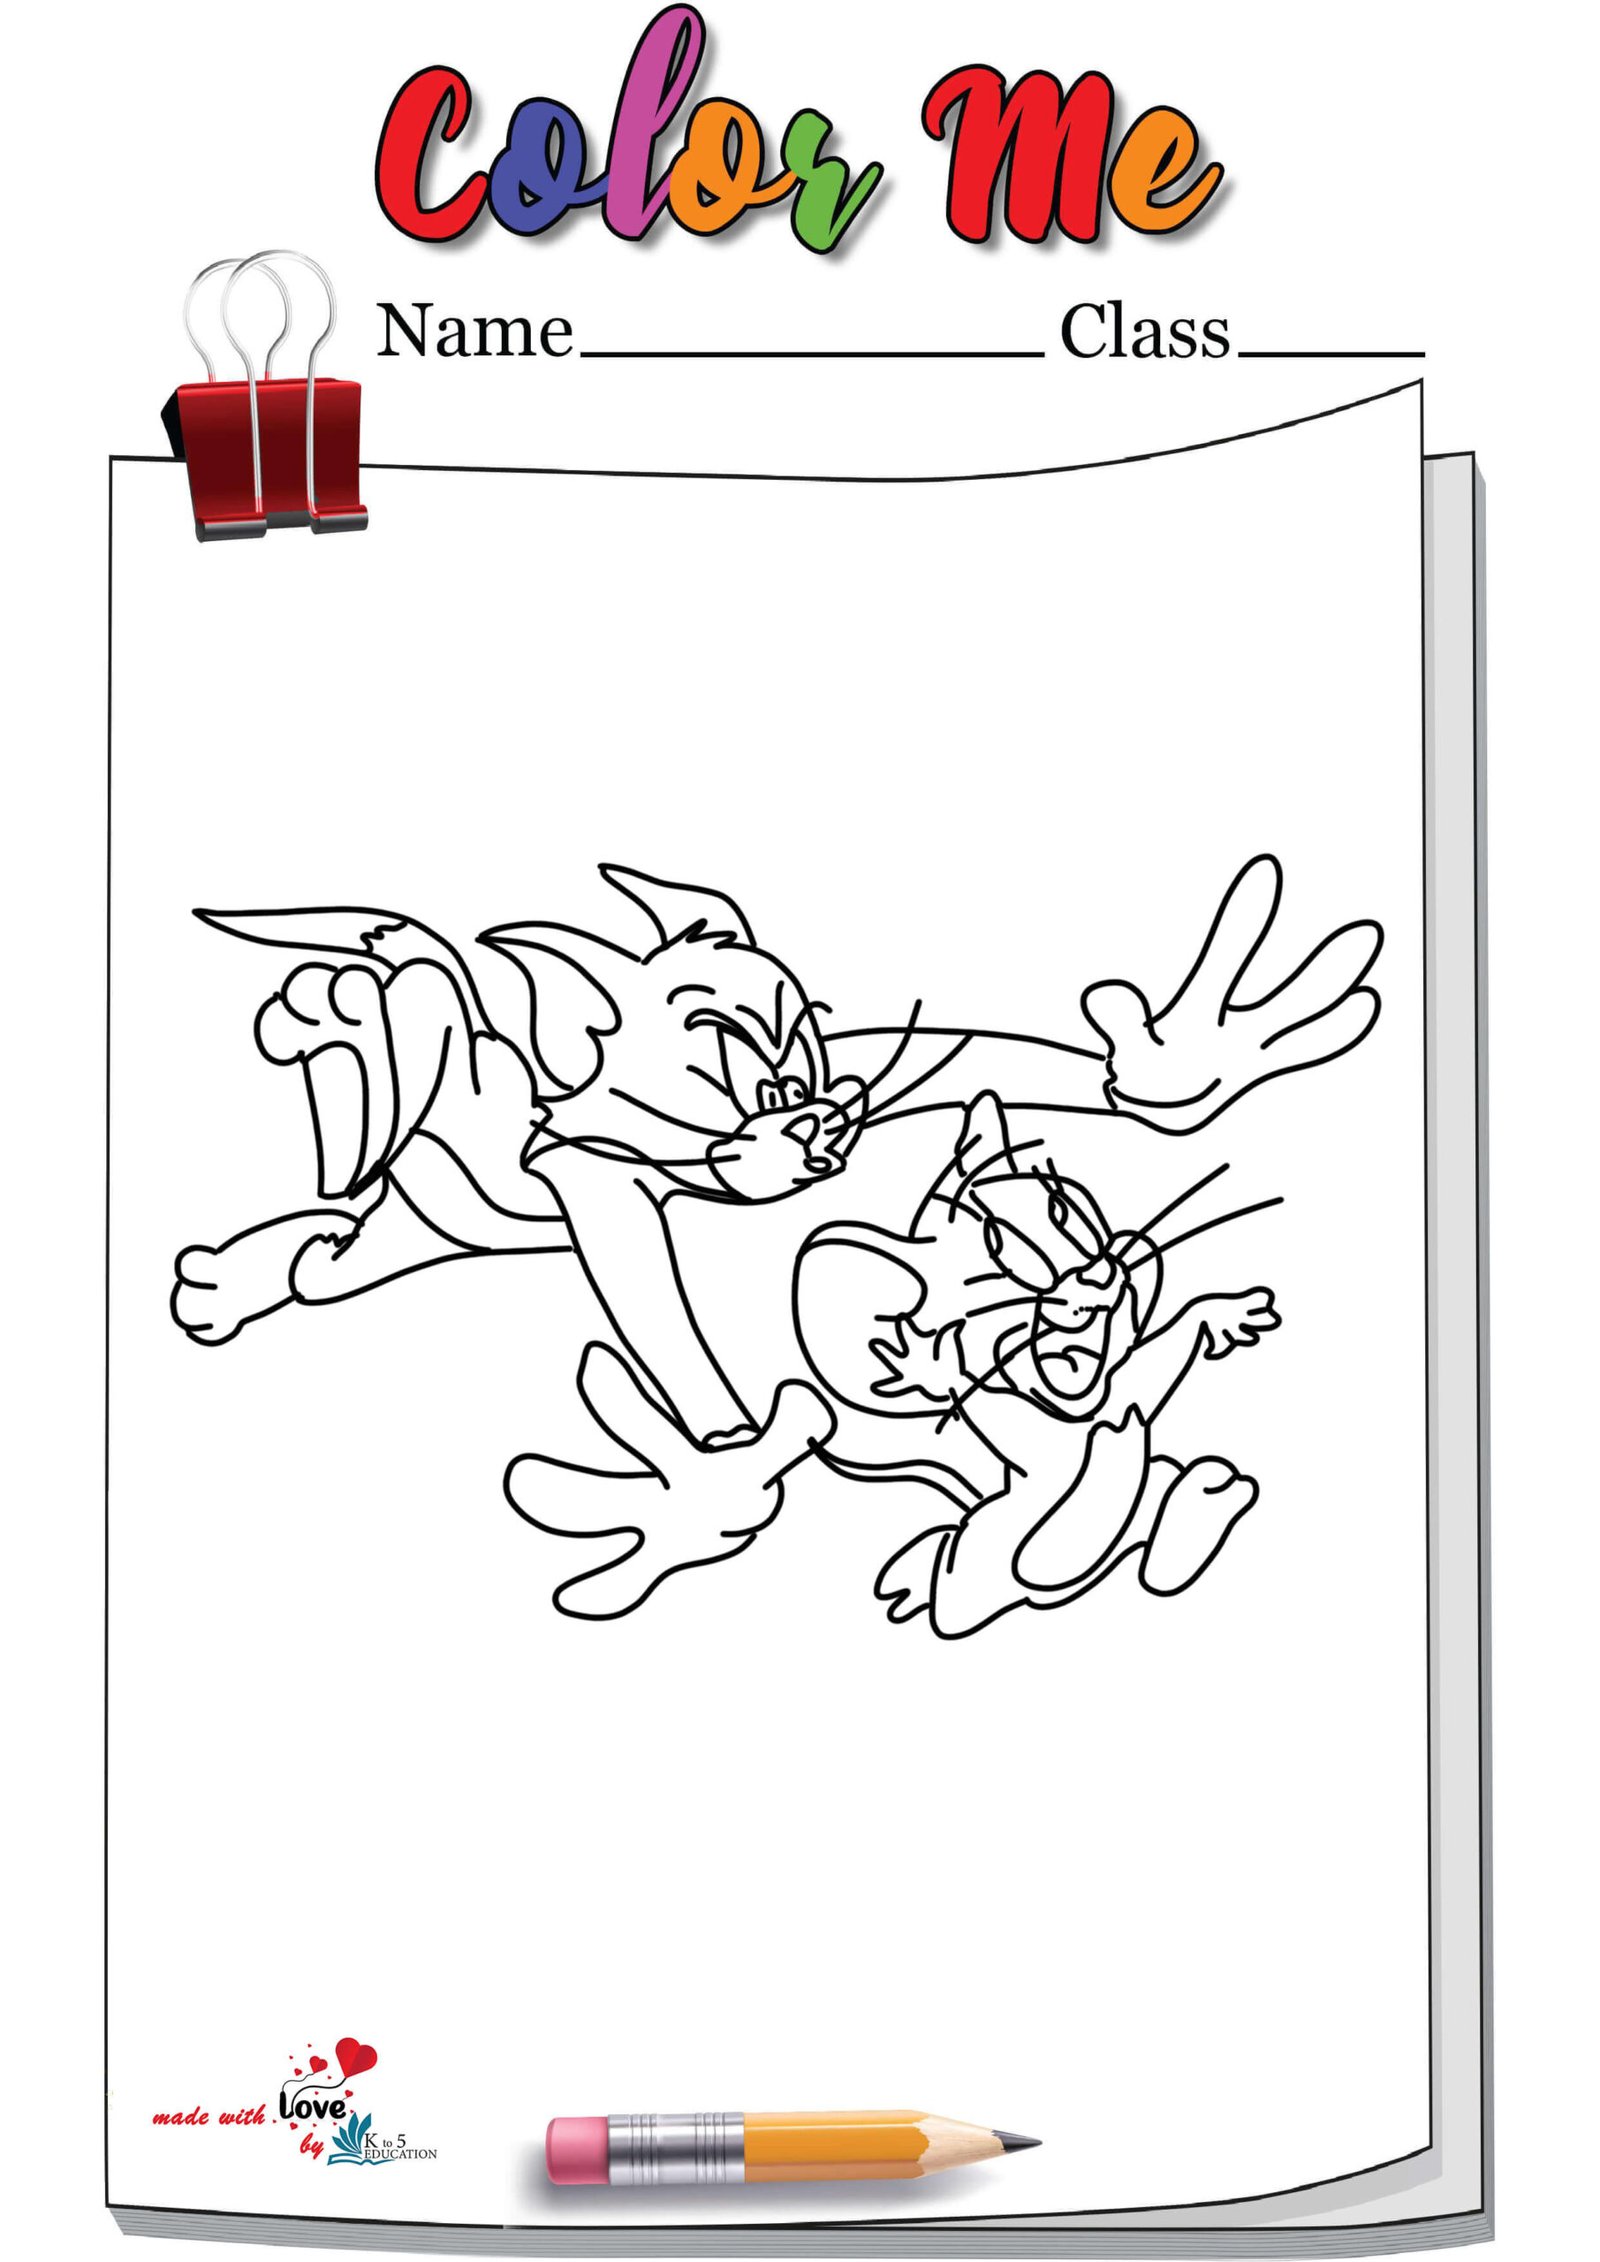 Running Tom And Jerry Coloring Page